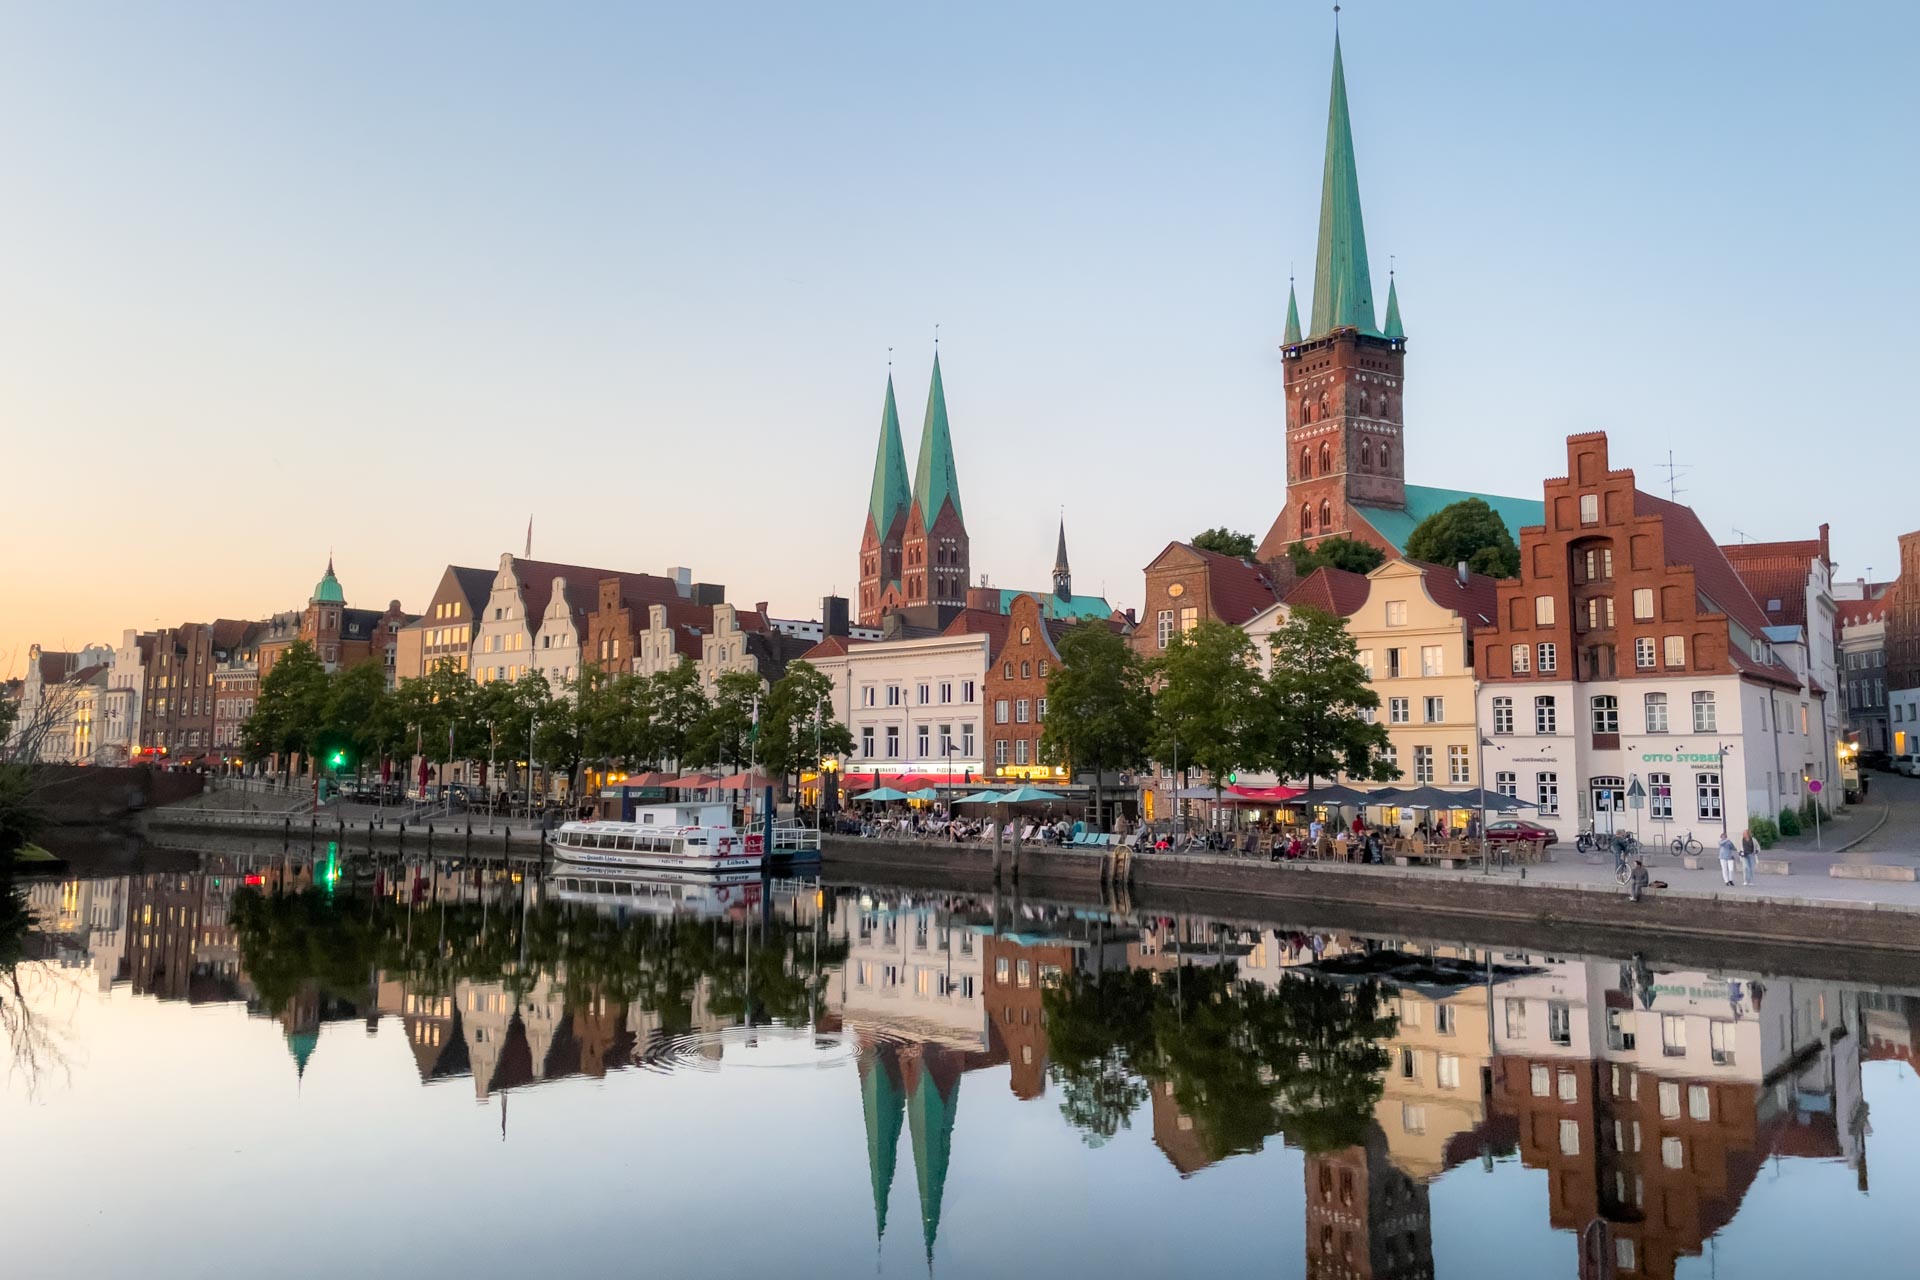 A Complete Travel Guide to Lübeck: 15 Best Things To Do & See